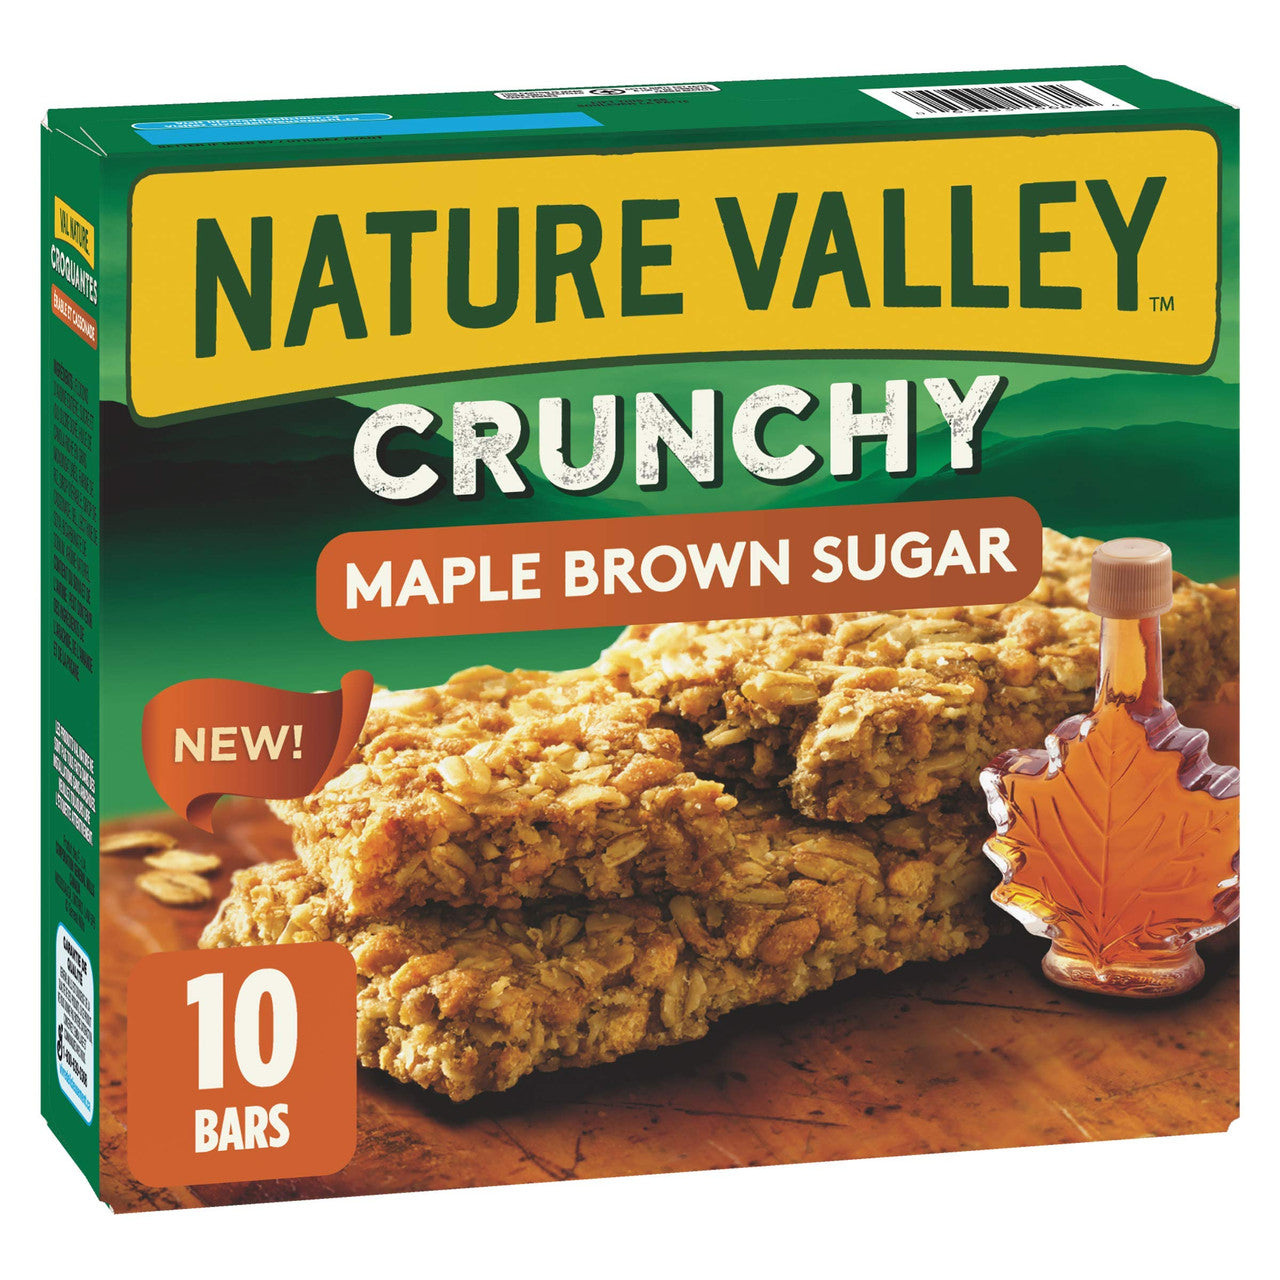 NATURE VALLEY Crunchy Maple Brown Sugar Granola Bars, 10 Count, 210g/7.4 oz., {Imported from Canada}